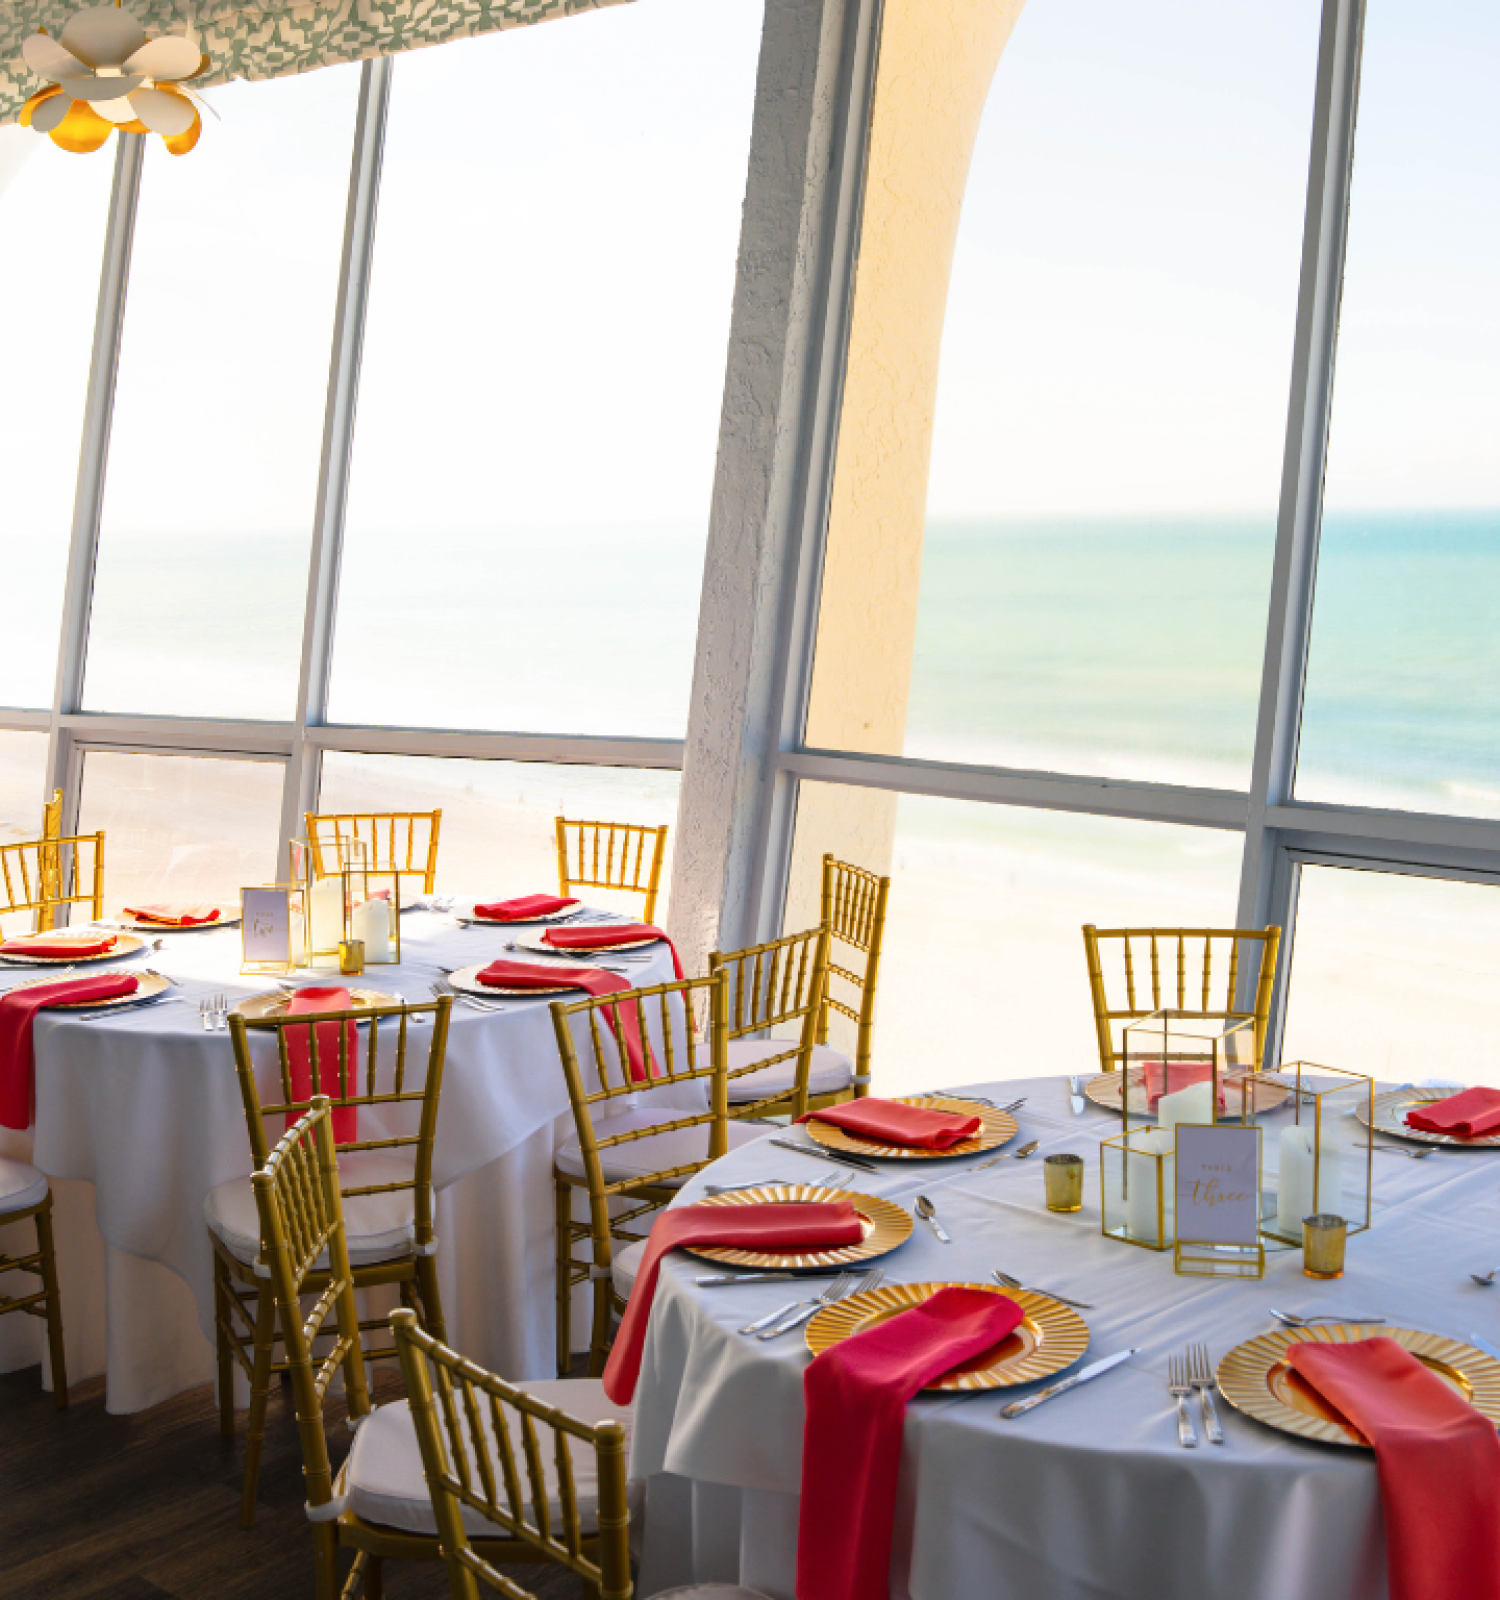 Dining room set for a meal with ocean view, red napkins, and white tablecloths.